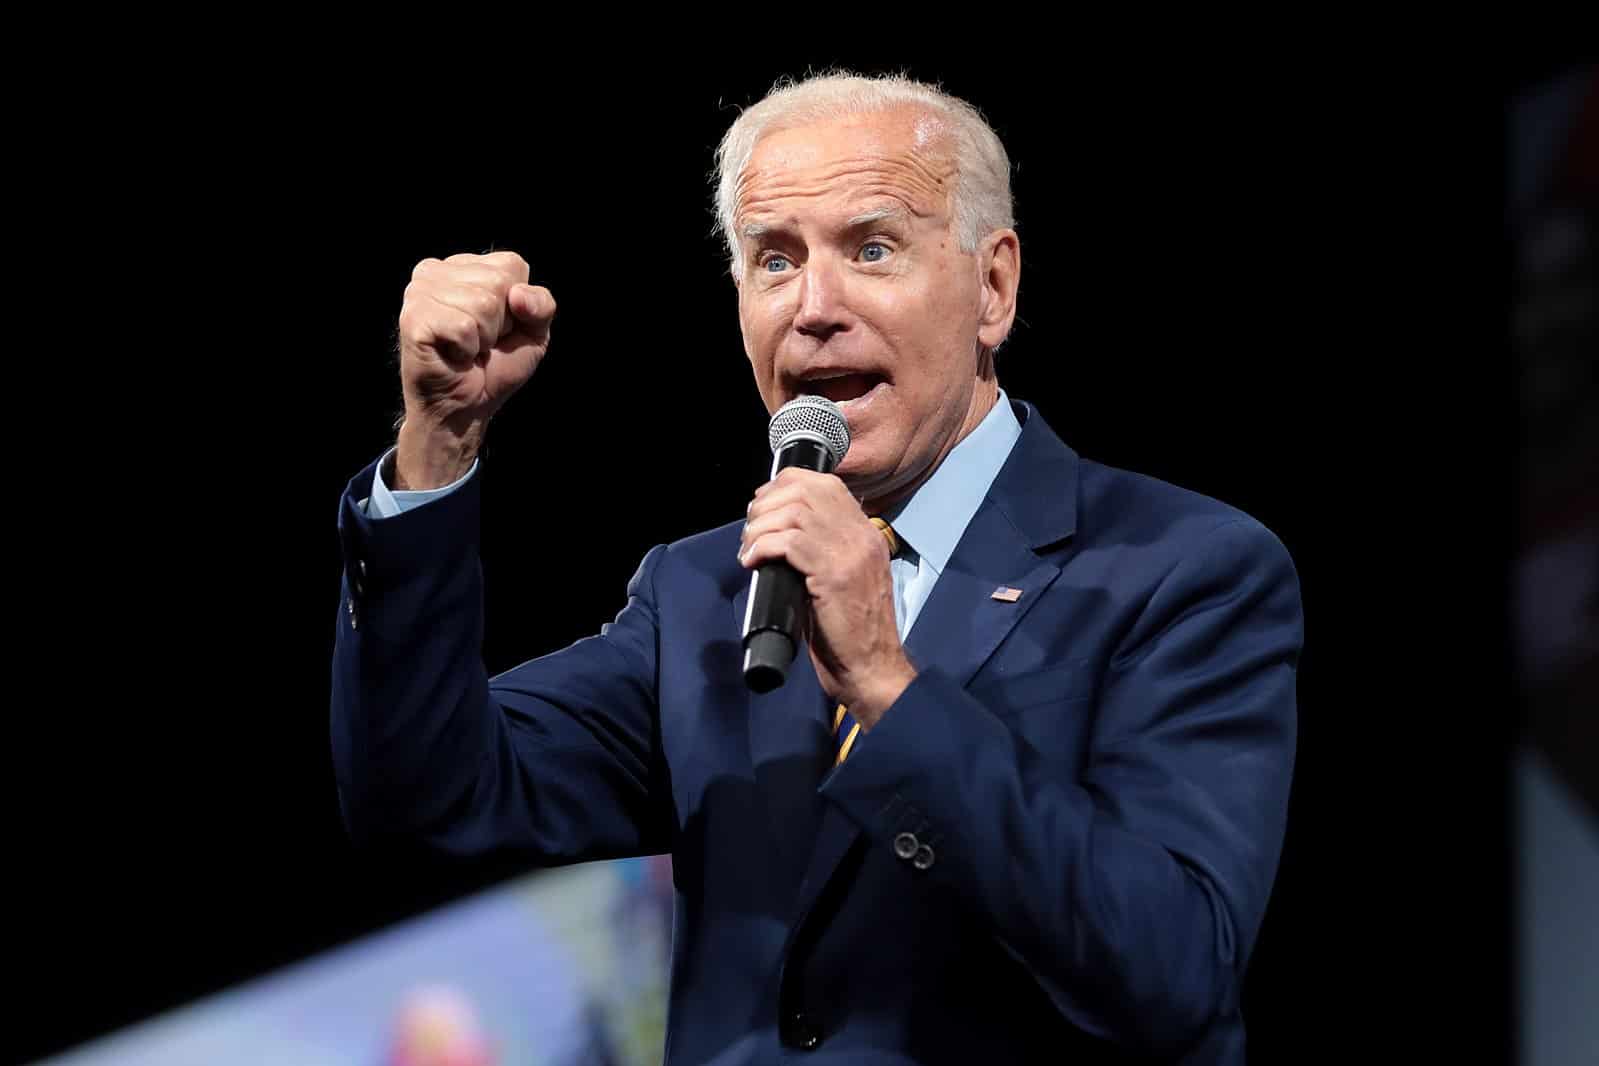 WELP: Biden Quietly Urging Companies To Buy Products From Russia